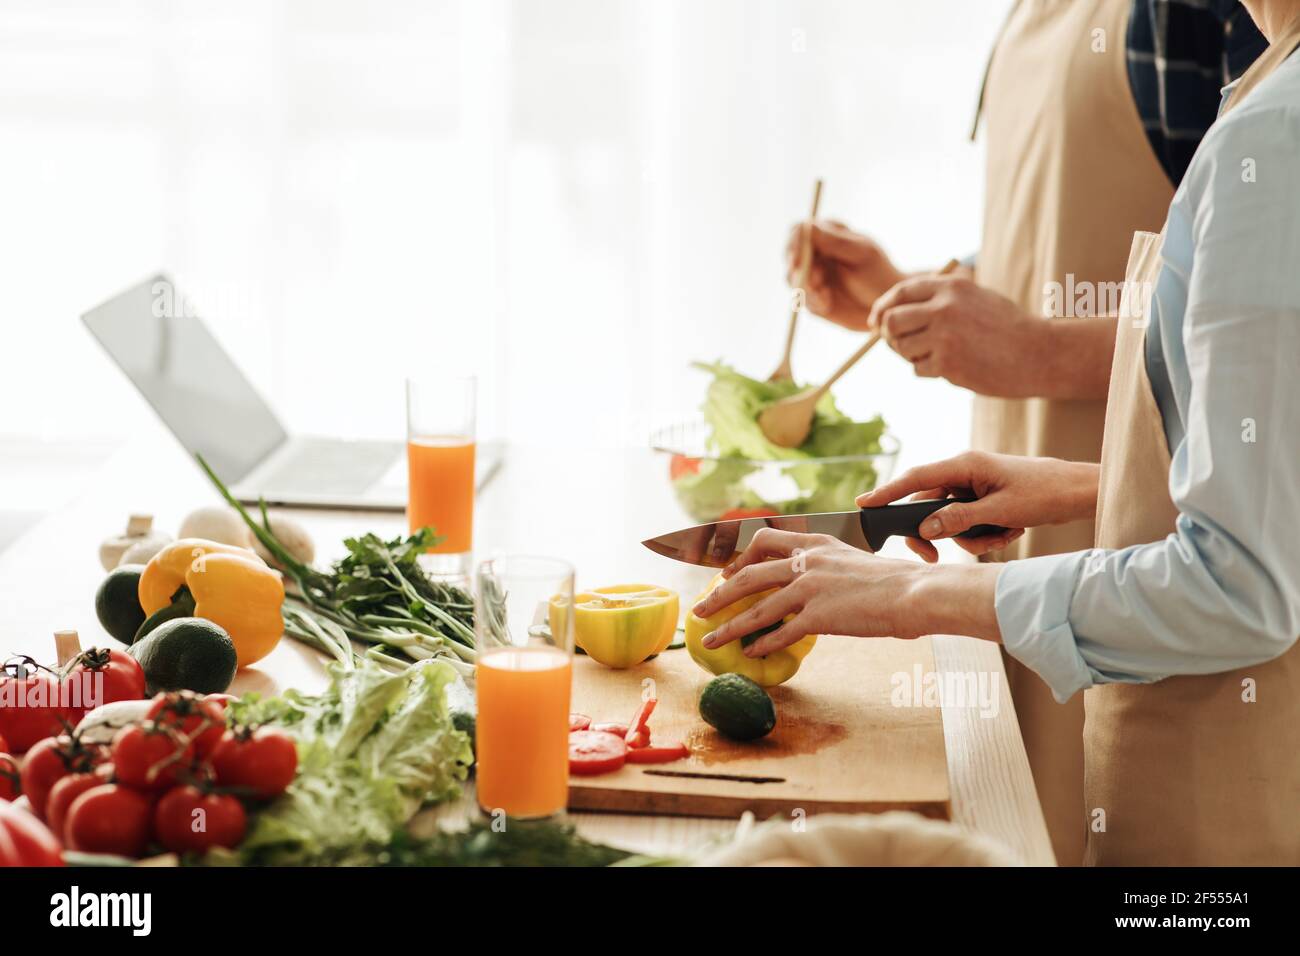 Healthy eating and vegetarianism in senior age Stock Photo